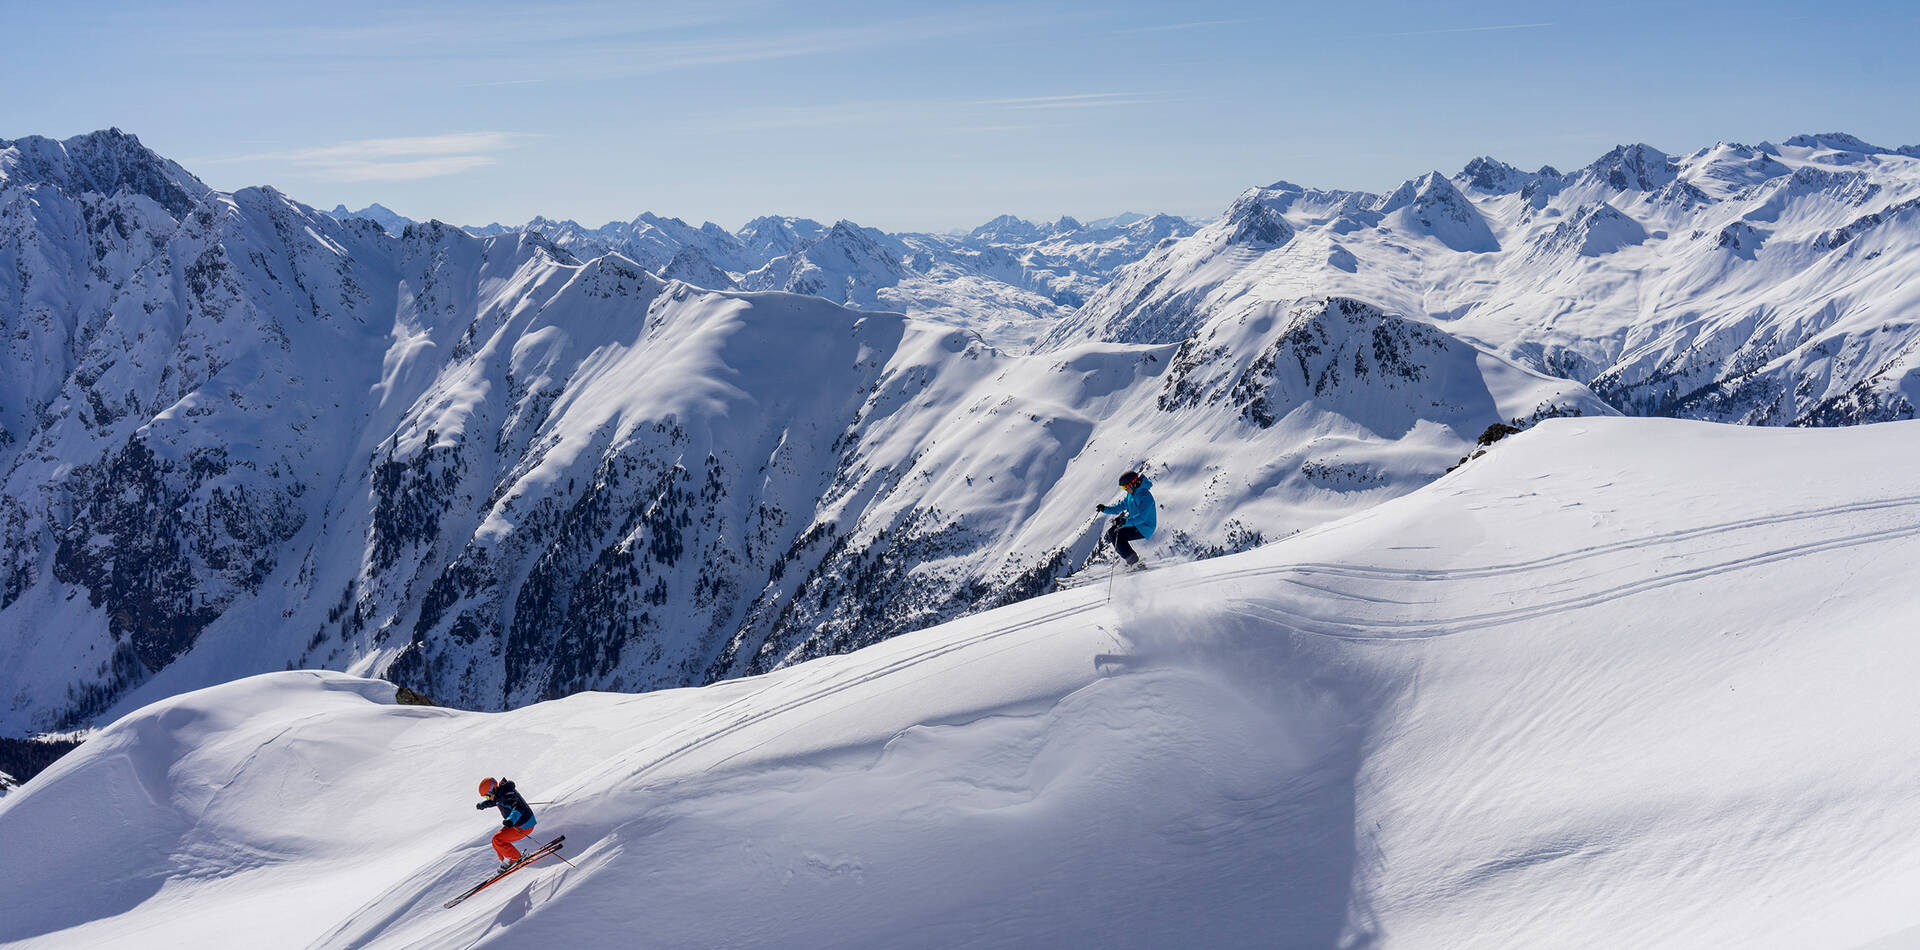  Freeriding in Ischgl